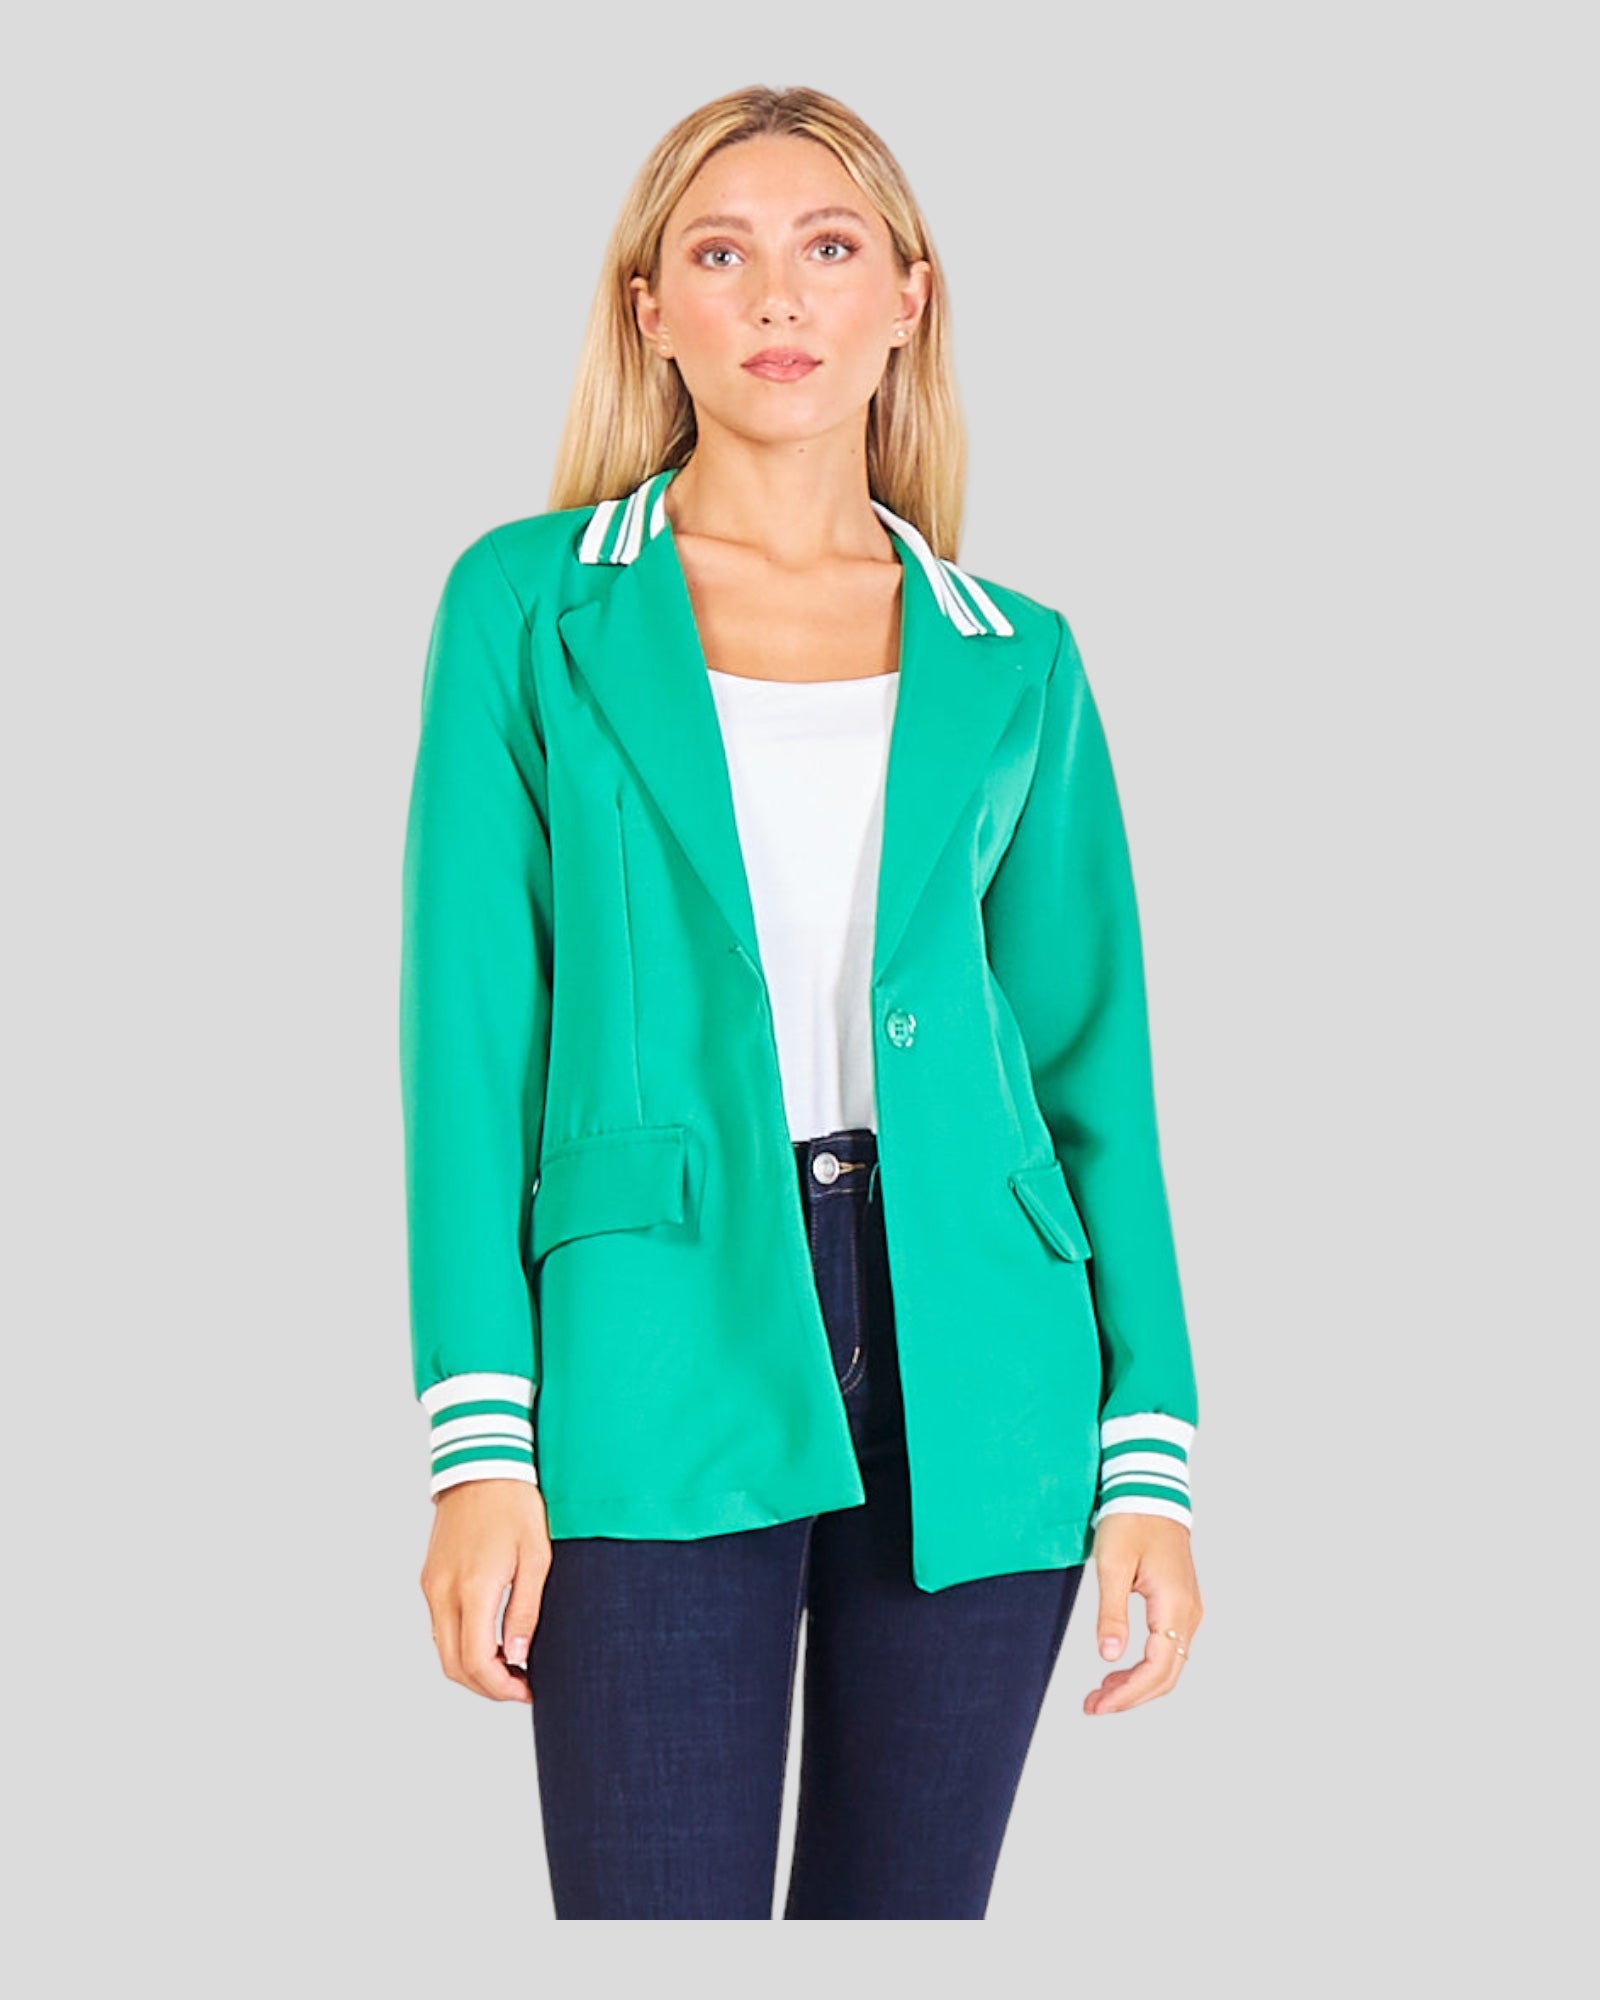 This image presents a Casual Sporty Blazer designed for effortless chic. Crafted from a light blend of cotton and viscose, it ensures comfortable wear. The blazer features distinctive stripes on the cuffs and collar, adding a sporty vibe to the overall look. The long collar contributes to a contemporary touch, while a one-button closure offers versatility and ease of wear.